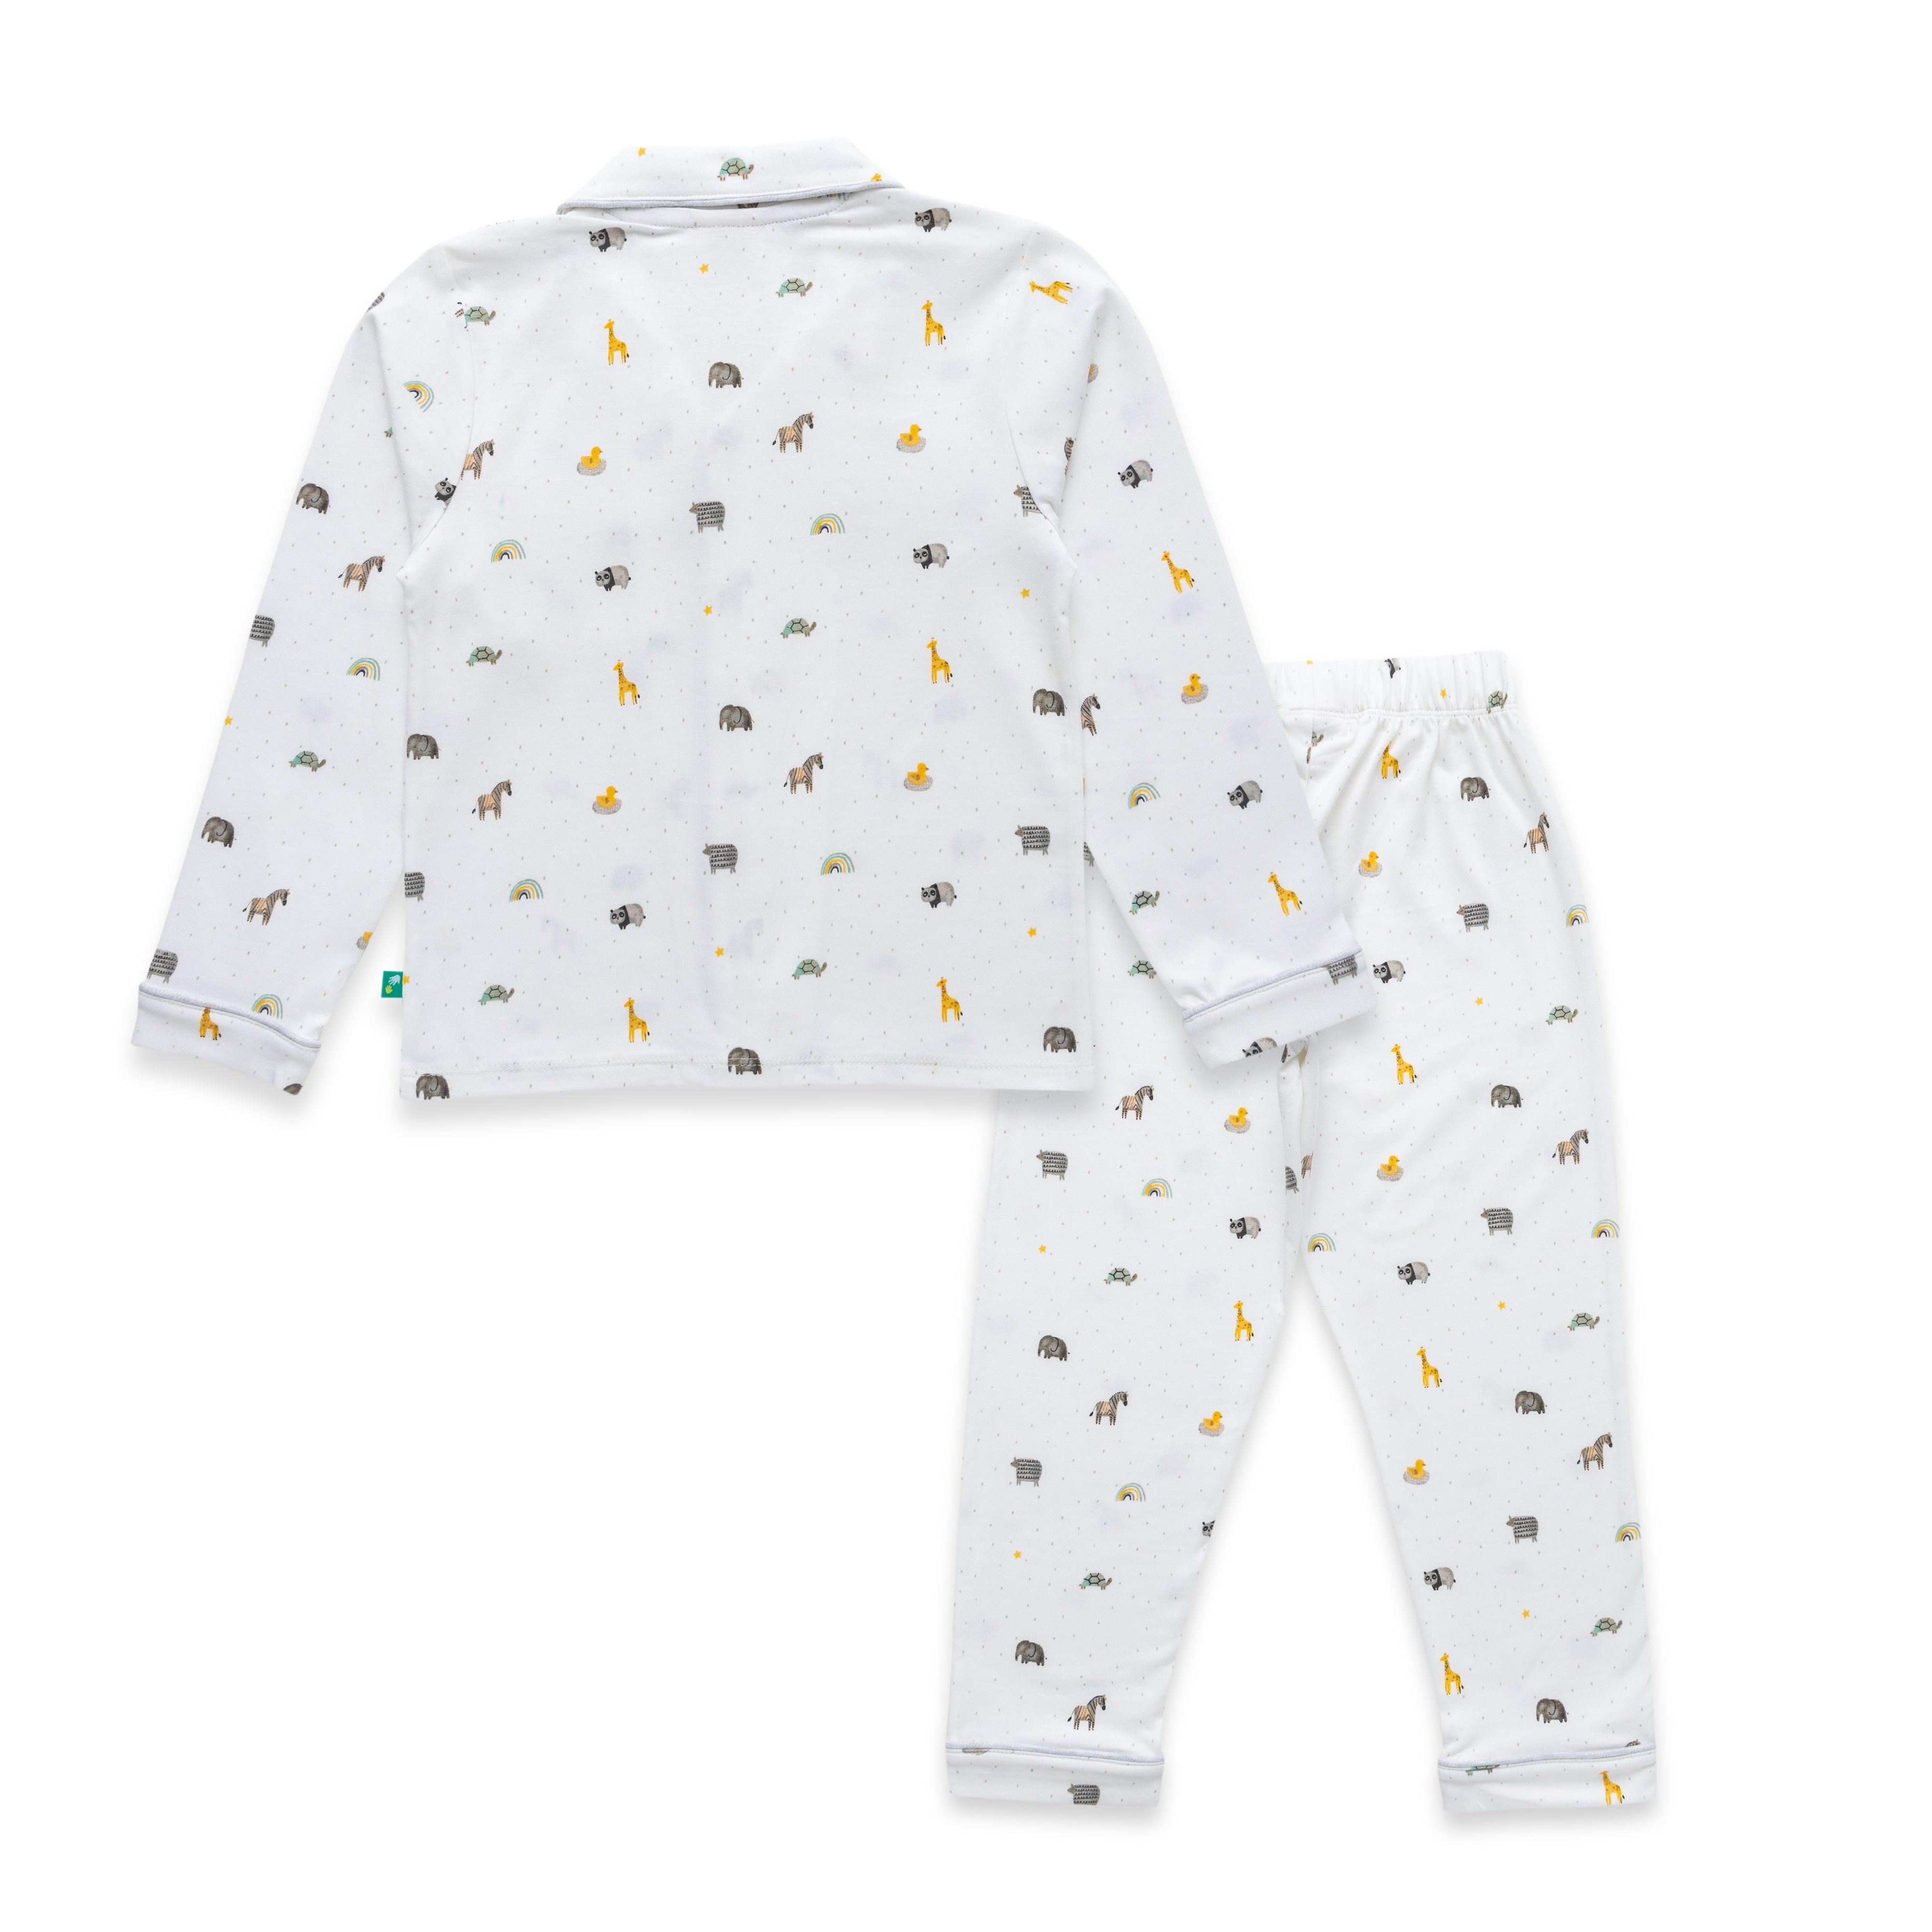 Boys Conversational Printed Pure Cotton Nightsuit Sets